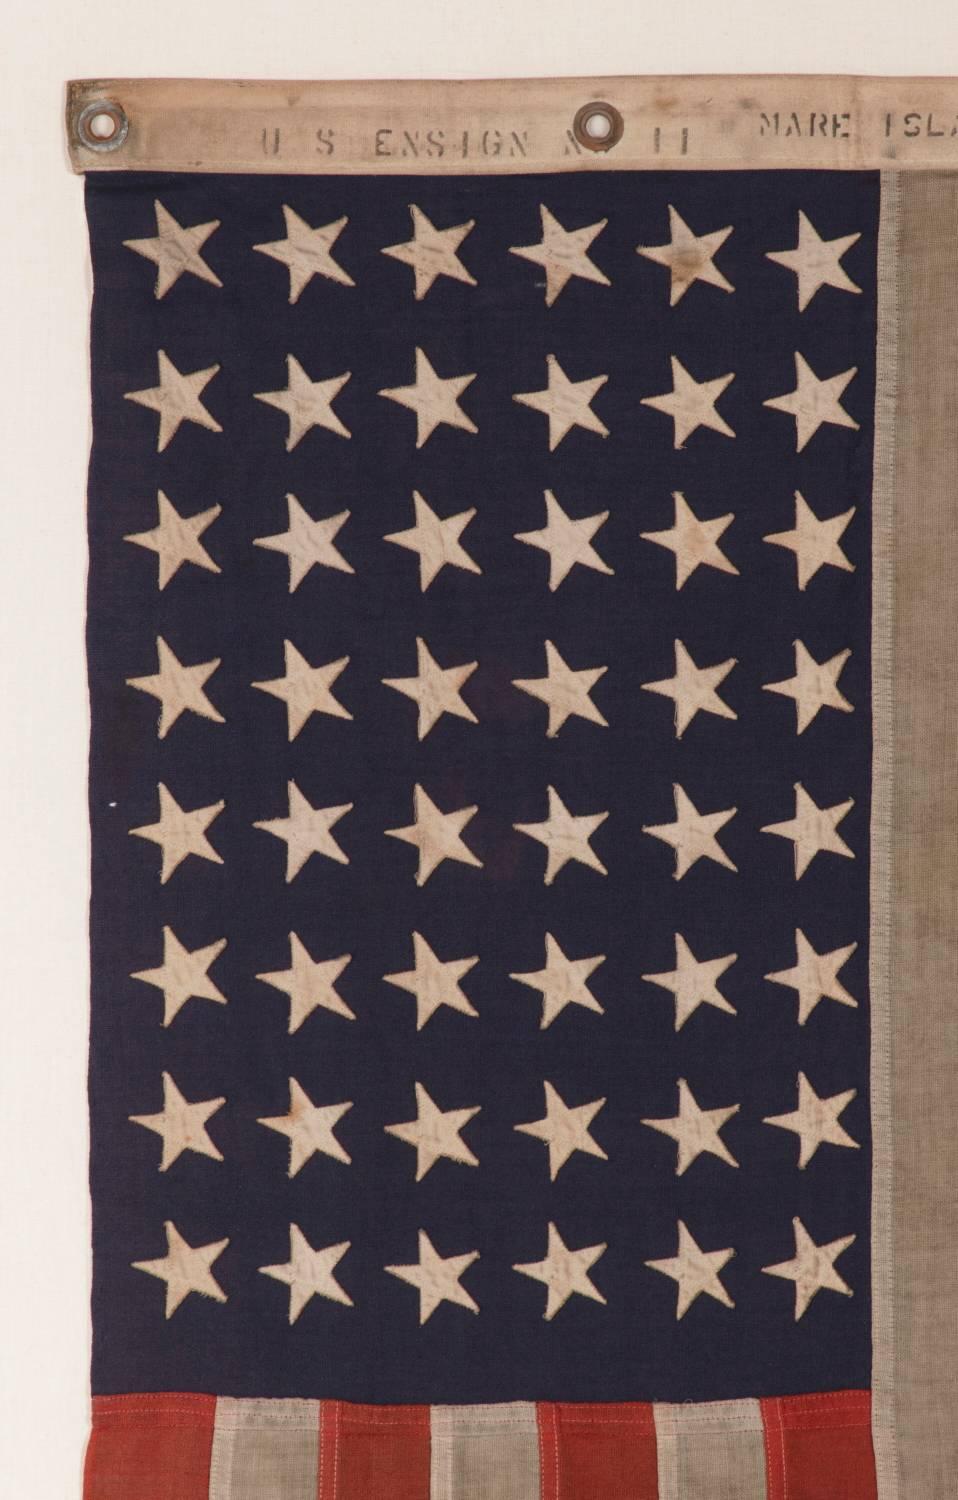 American 48 Star, U.S. Navy Small Boat Ensign, Dated July 1942